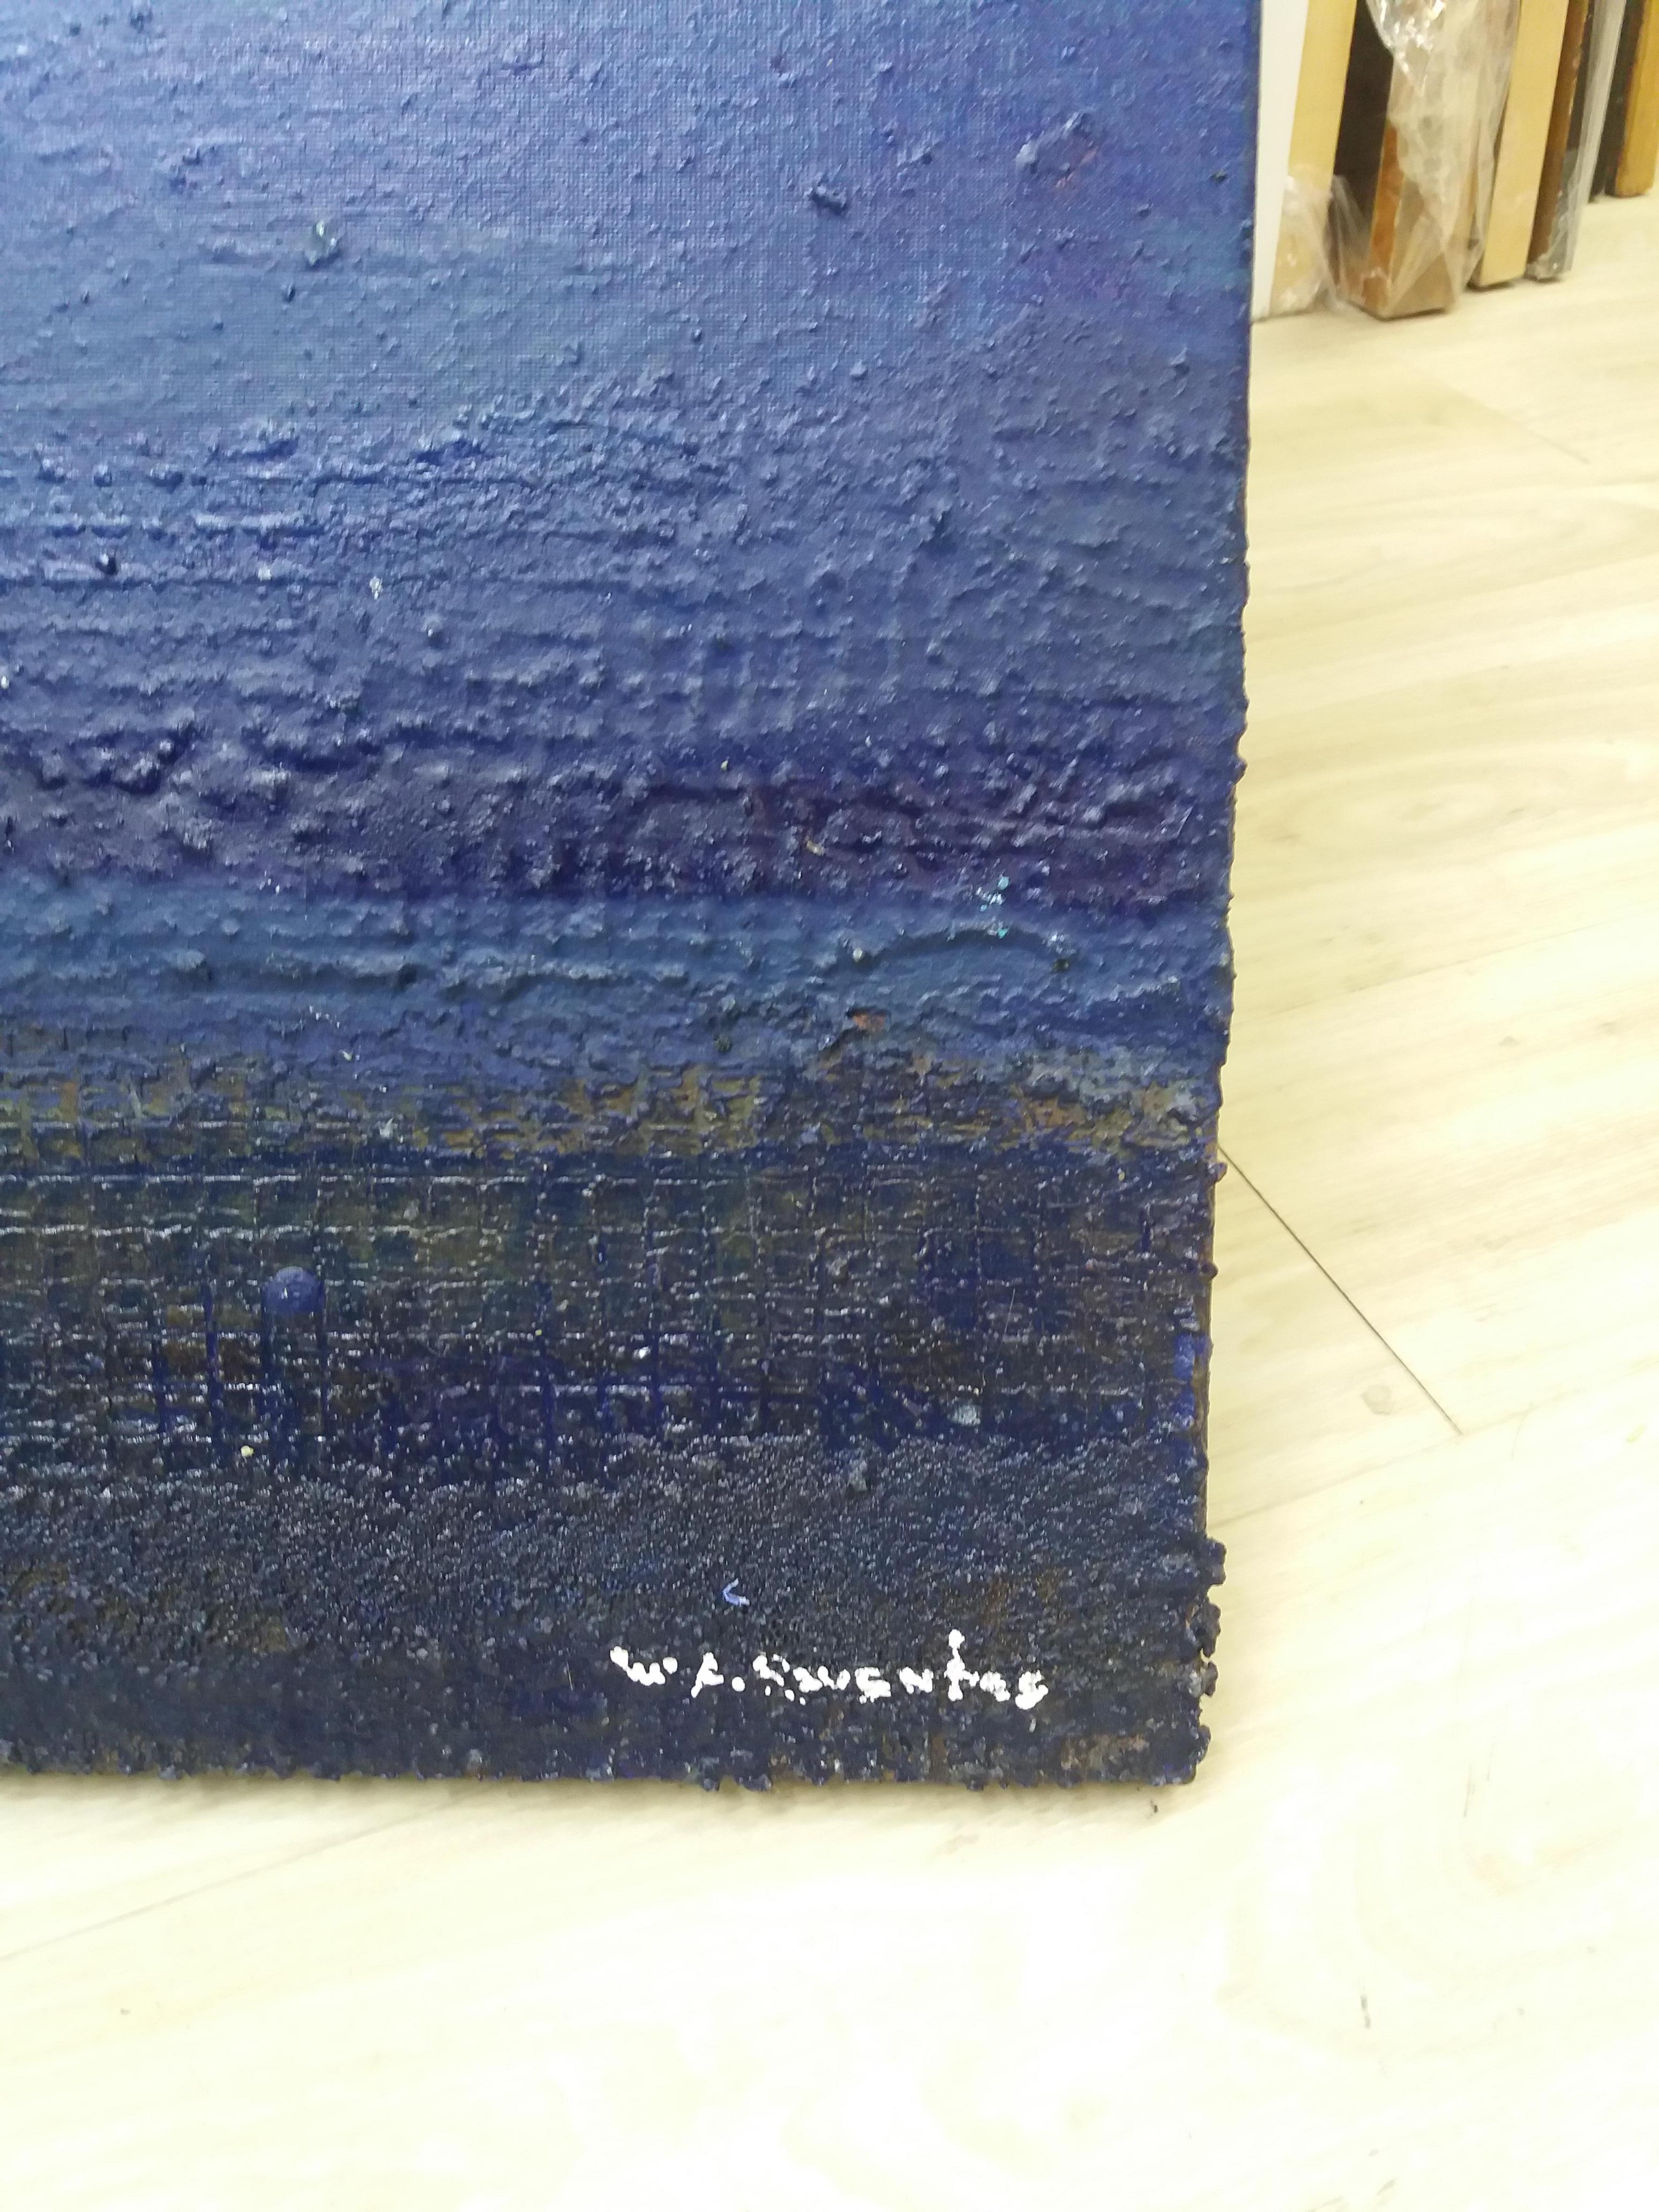 Raventos  SEA AND BLUE SKY  original expressionist mixed media canvas  - Expressionist Painting by Maria Asuncion Raventos